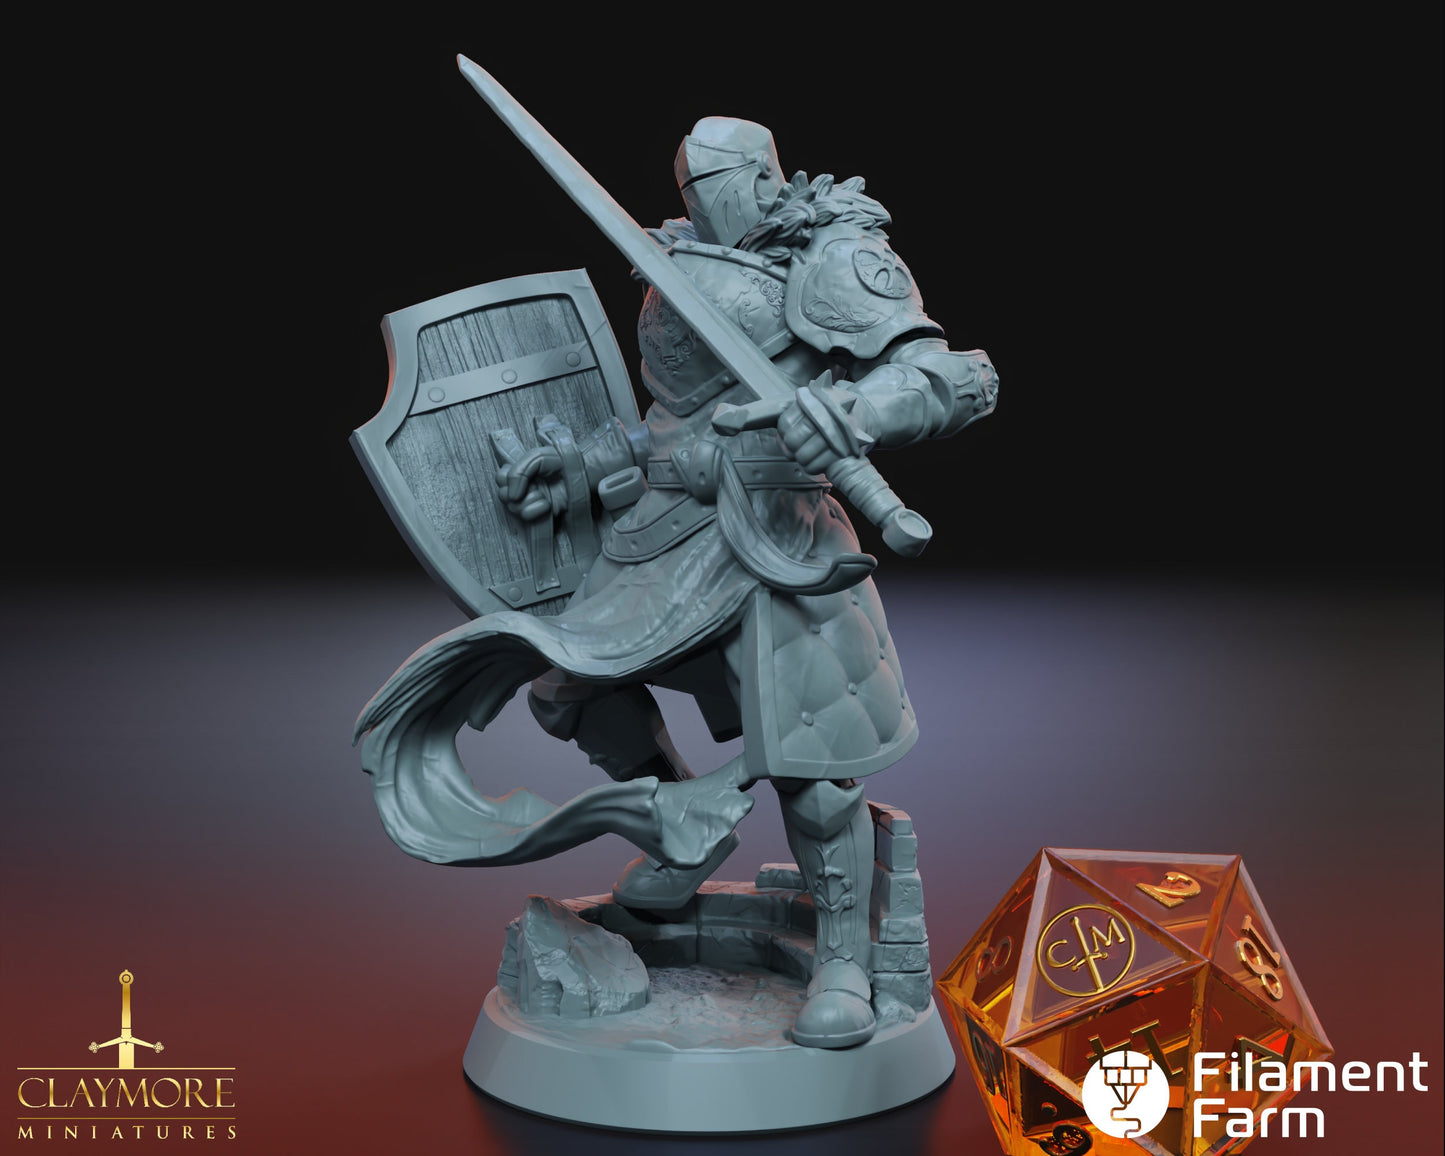 Sir Roland, The Valiant, Fighter/Warrior - Wages of Sin - Highly Detailed Resin 3D Printed Miniature